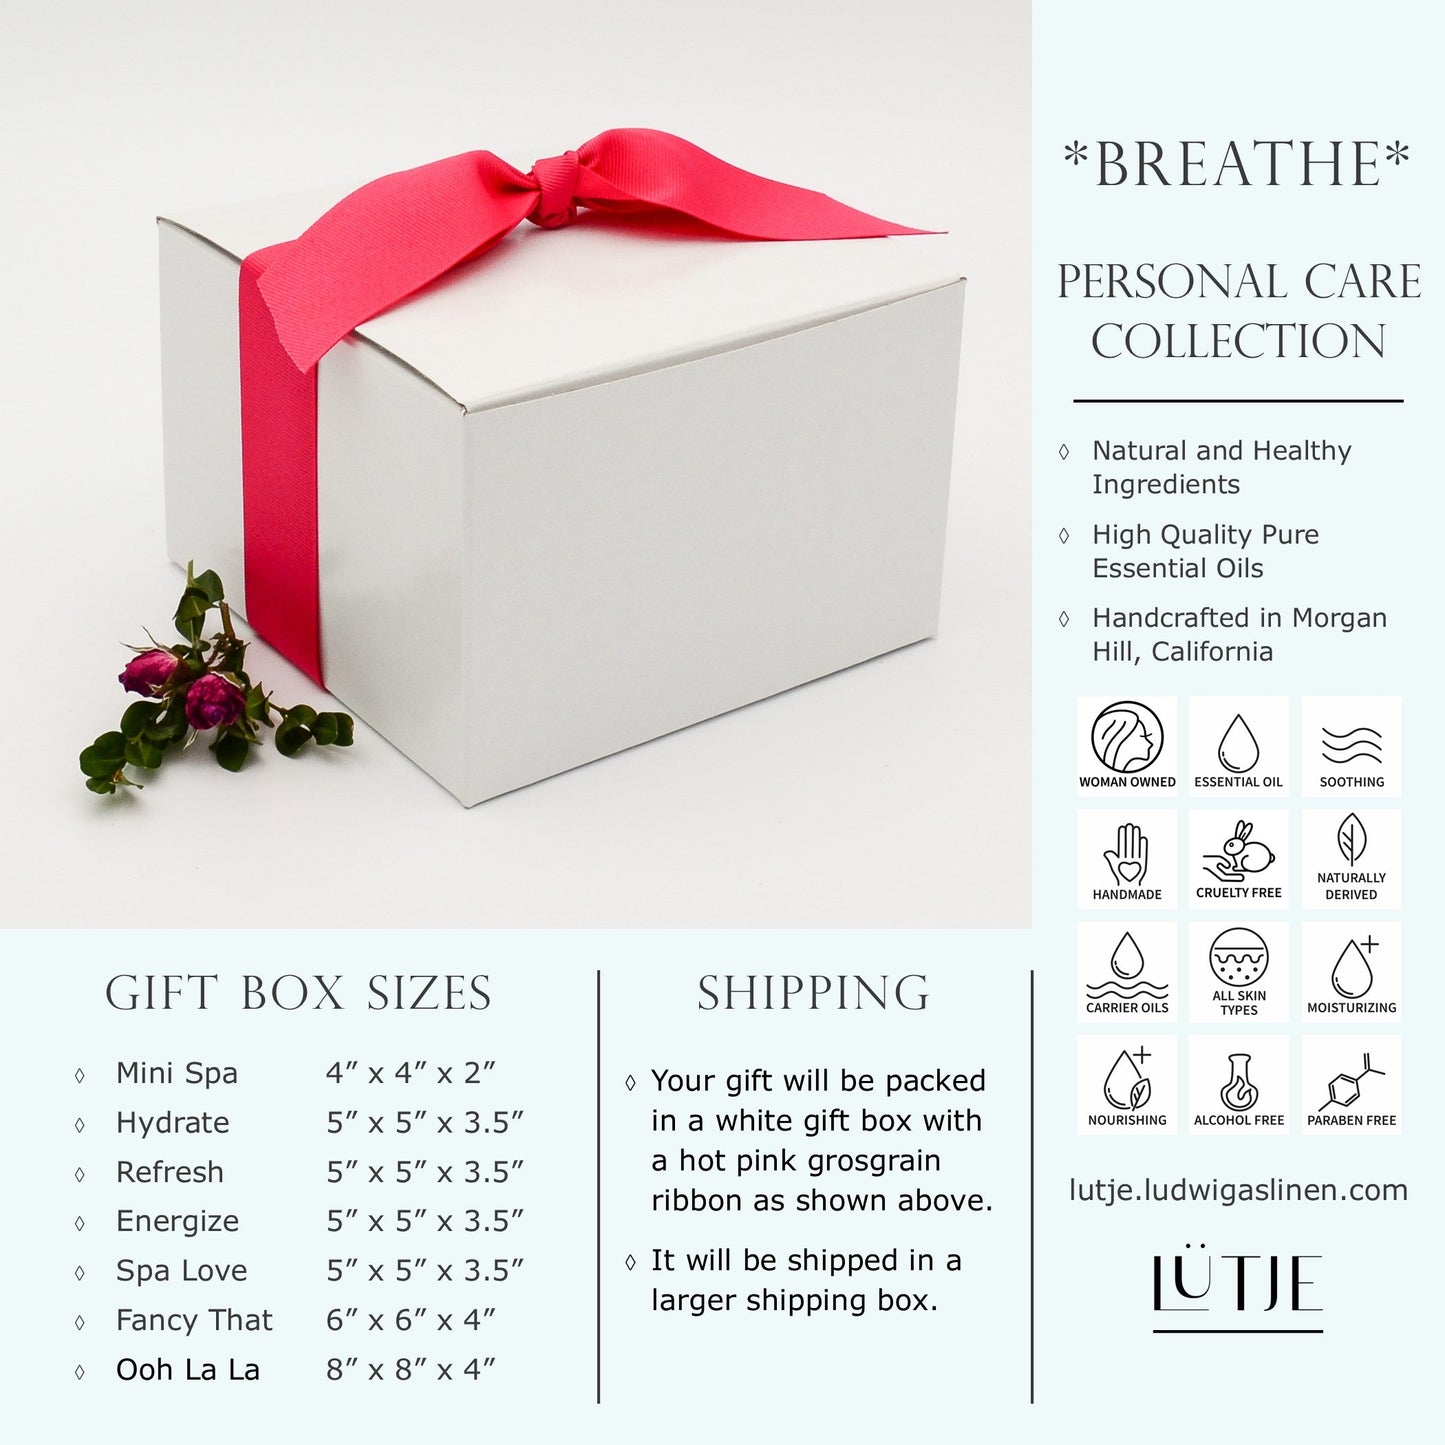 Gift Box for women Cactus Blossom Collection shipping and general information including made with natural and healthy ingredients,woman owned, handmade, cruelty free, naturally derived, pure essential oils, all skin types, moisturizing, soothing, nourishing, alcohol free and paraben free. 